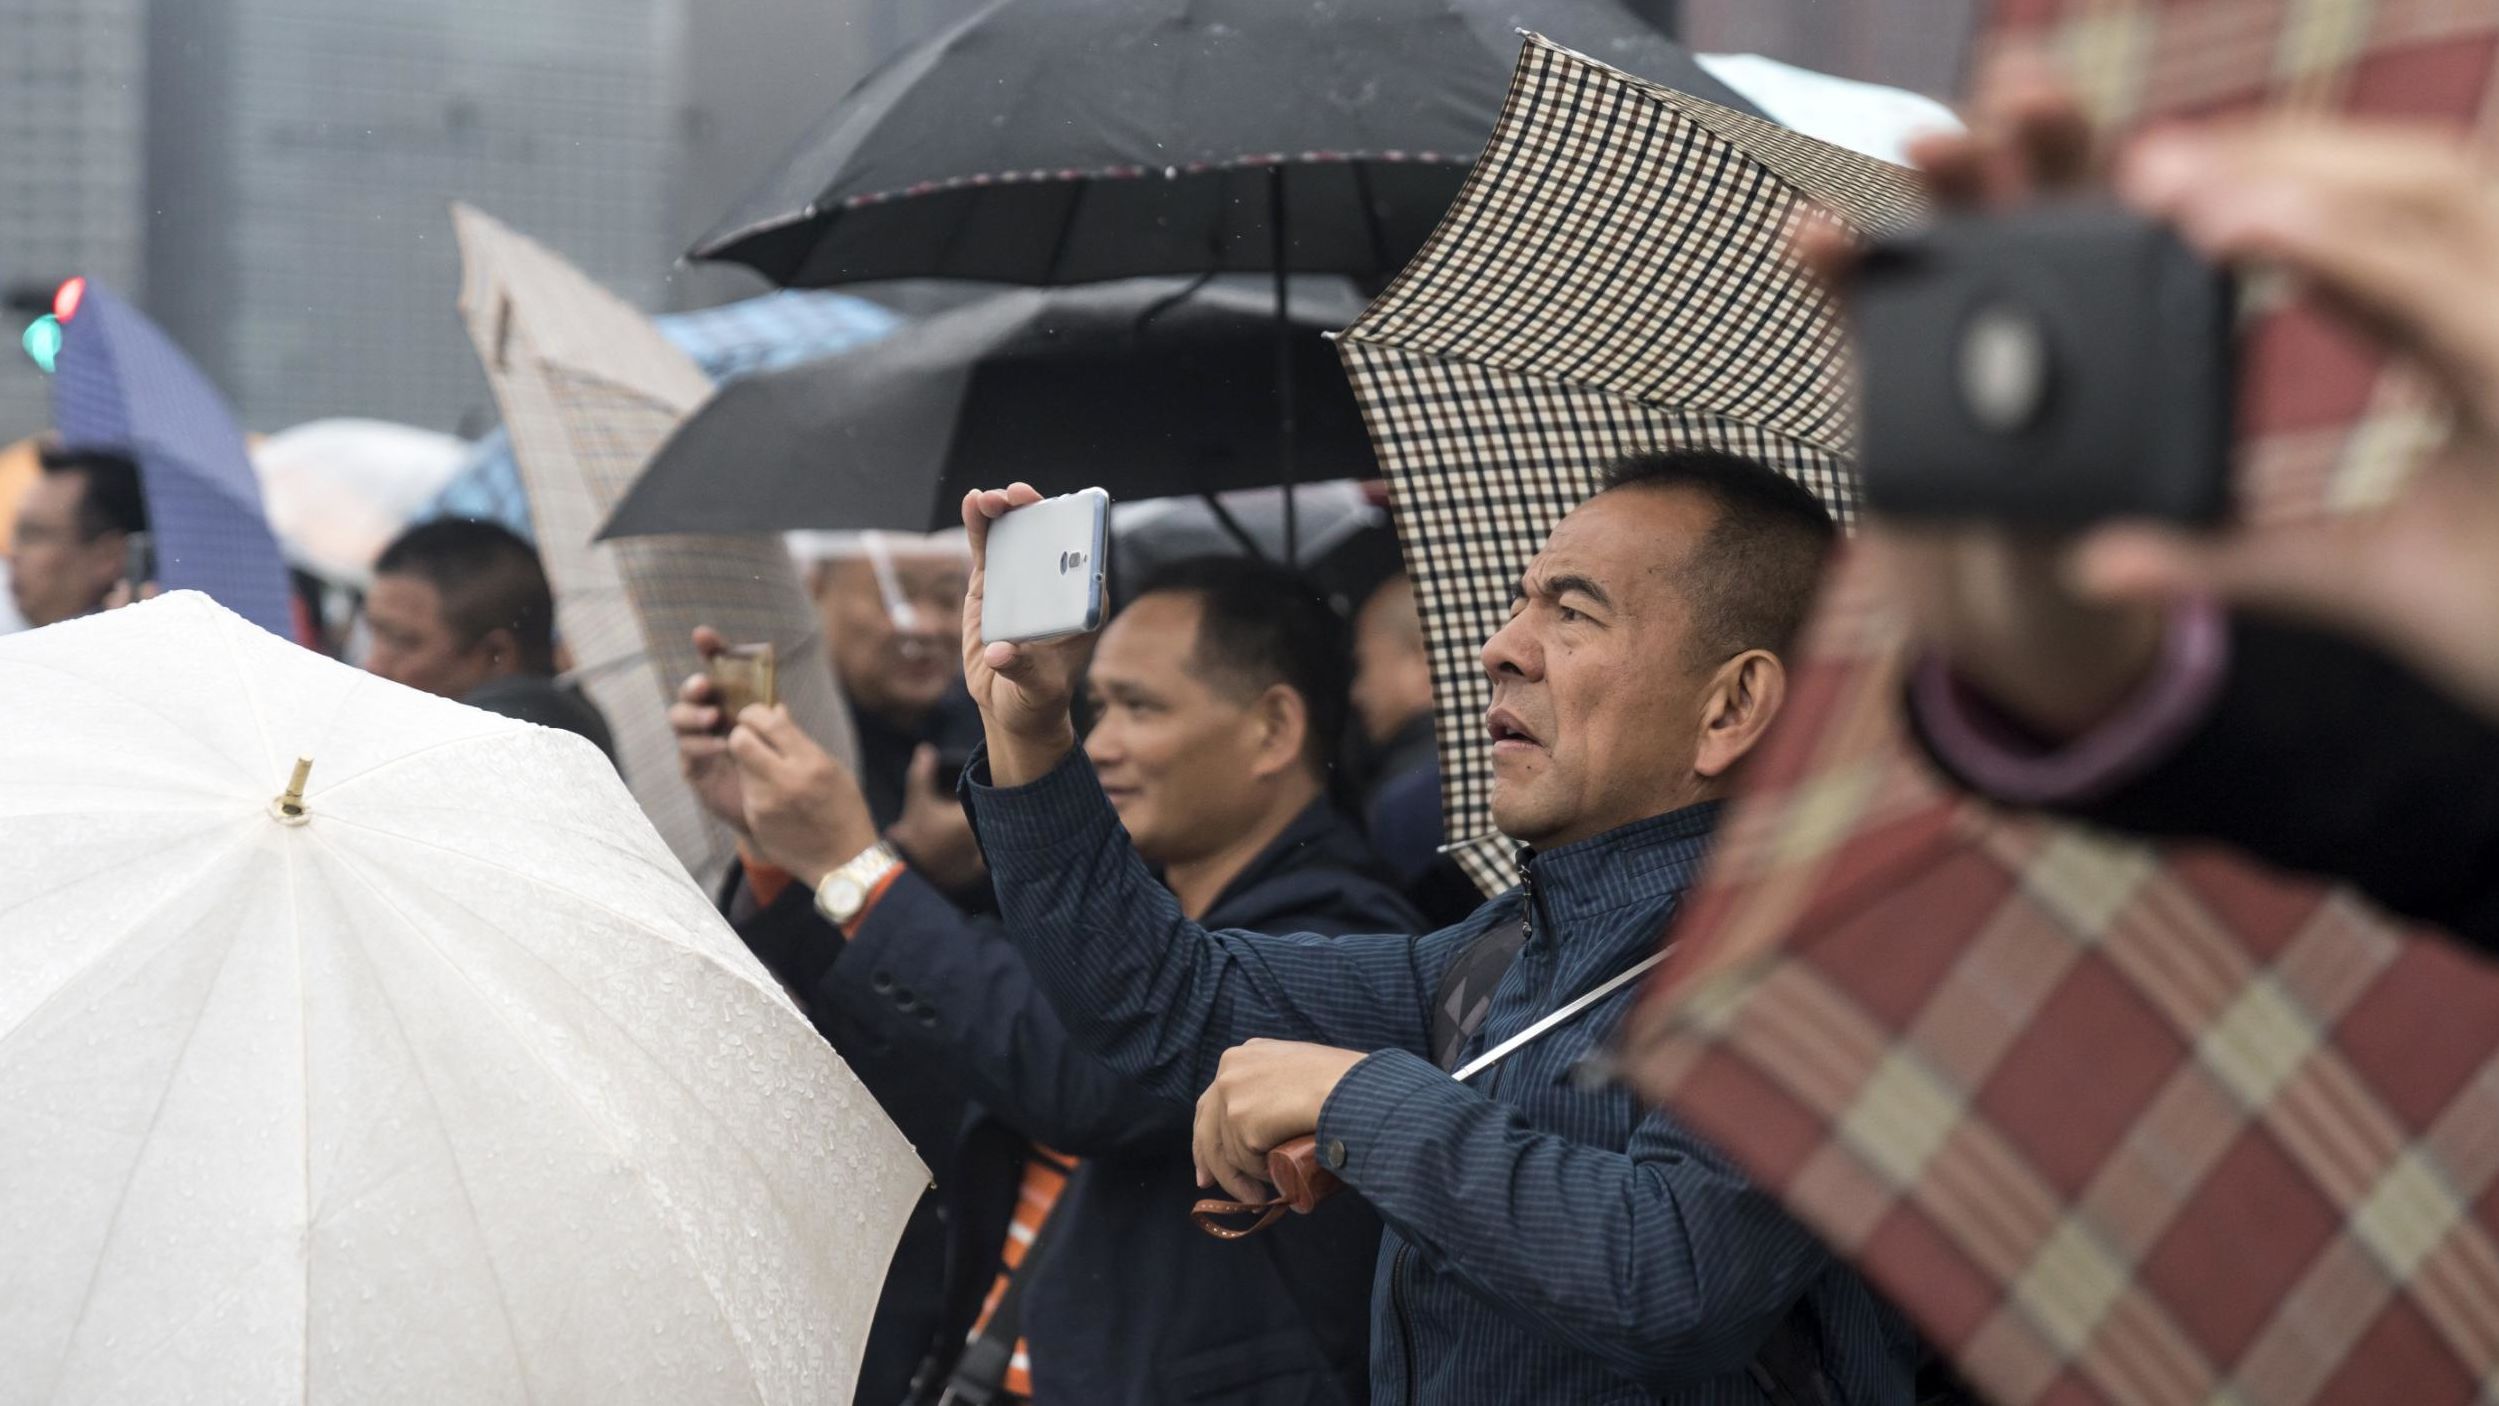 People photograph the Imperial Palace before Japan's Emperor Naruhito's proclamation of his ascension to the throne.